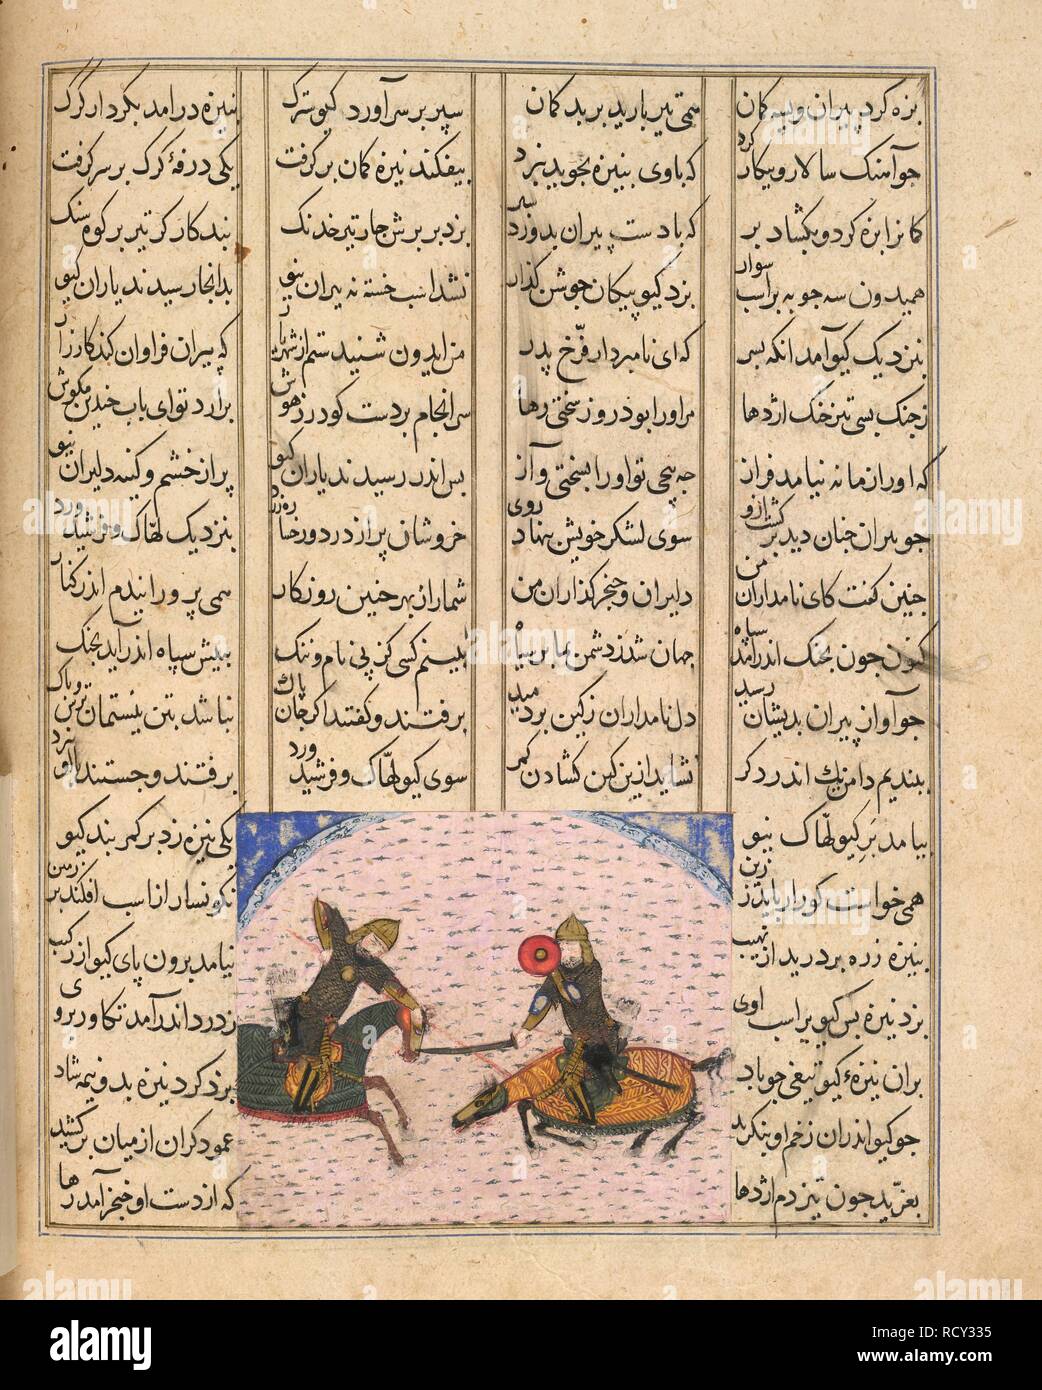 Giv and Piran in battle. Shahnama. Iran, 1446. The battle between Giv and Piran. A miniature painting from a fifteenth century manuscript of the epic poem of Shahnama.  Image taken from Shahnama.  Originally published/produced in Iran, 1446. . Source: Or. 12688, f.293v. Language: Persian. Stock Photo